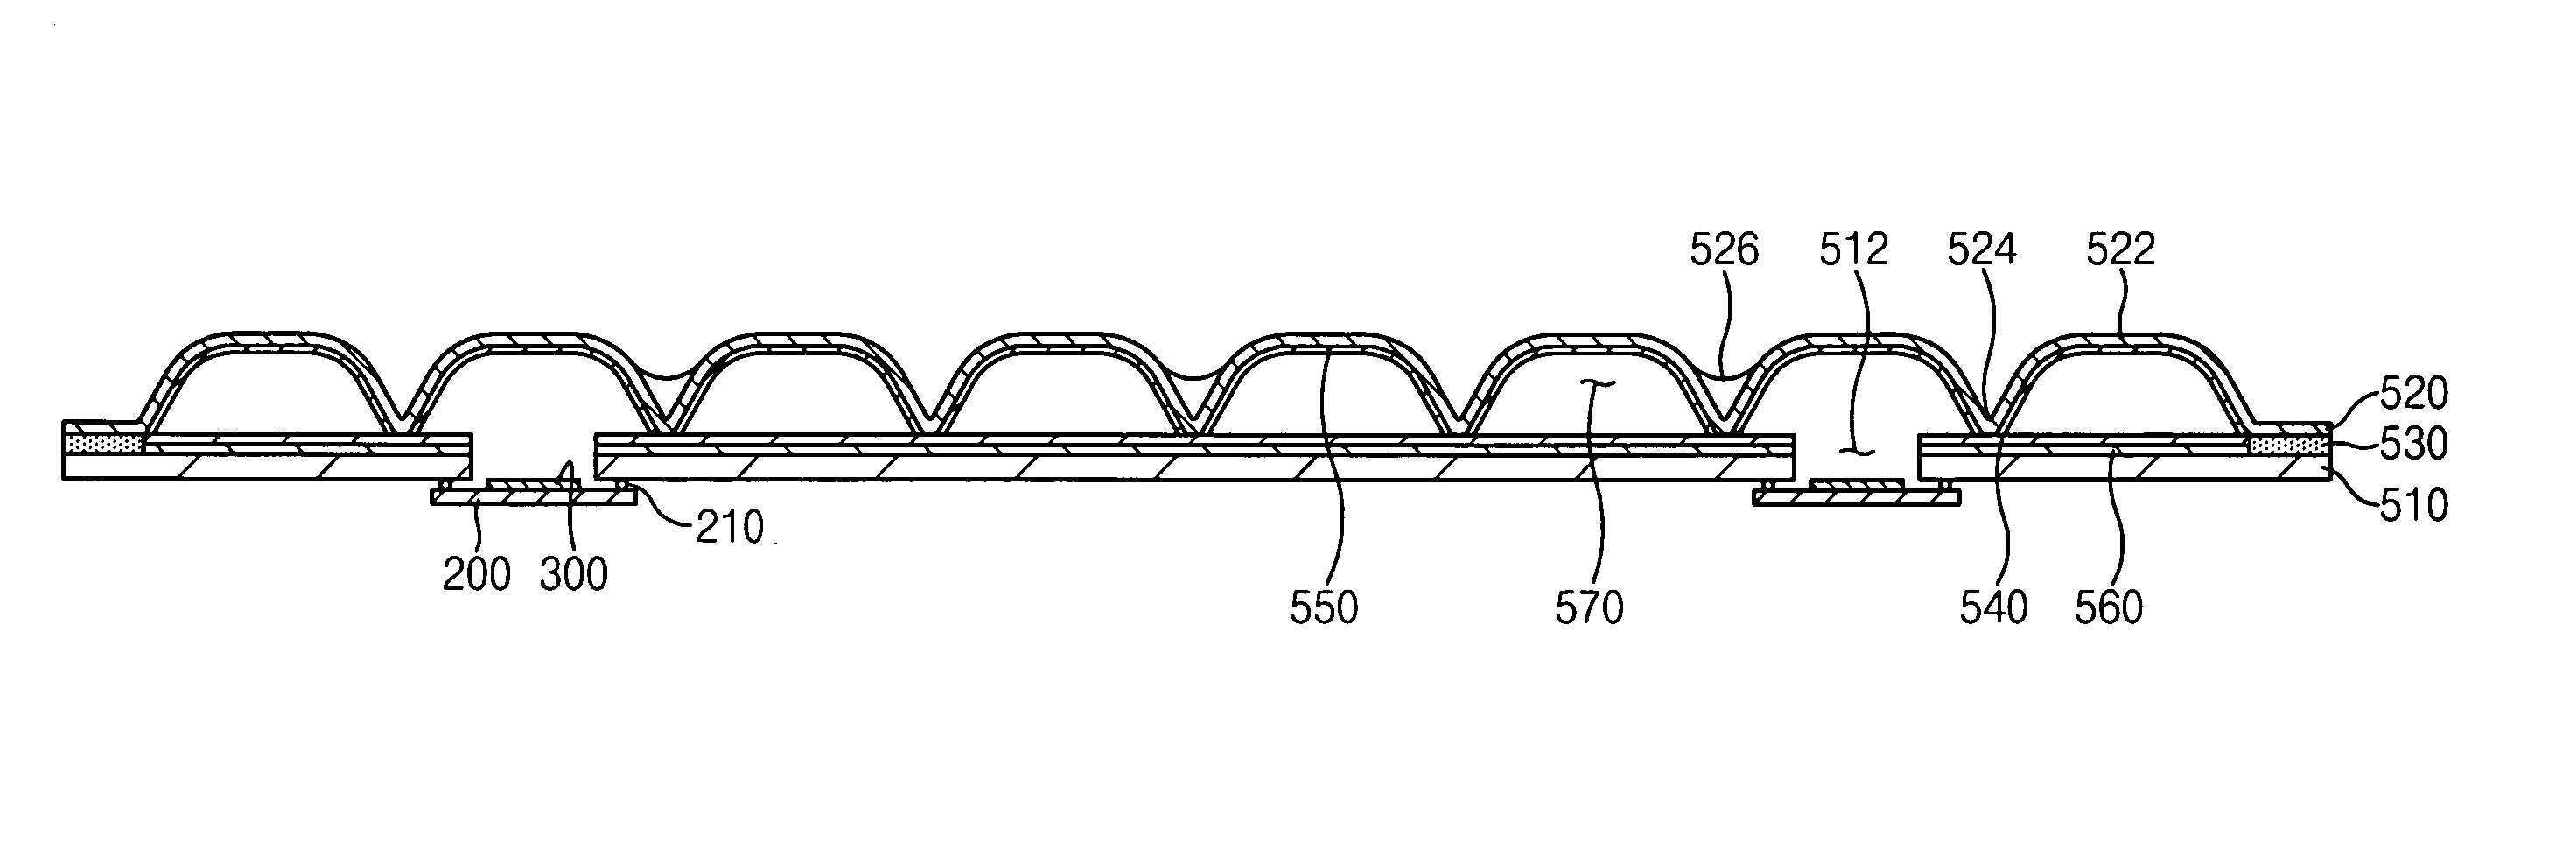 Planar light source device, method for manufacturing the same, and display device having the same